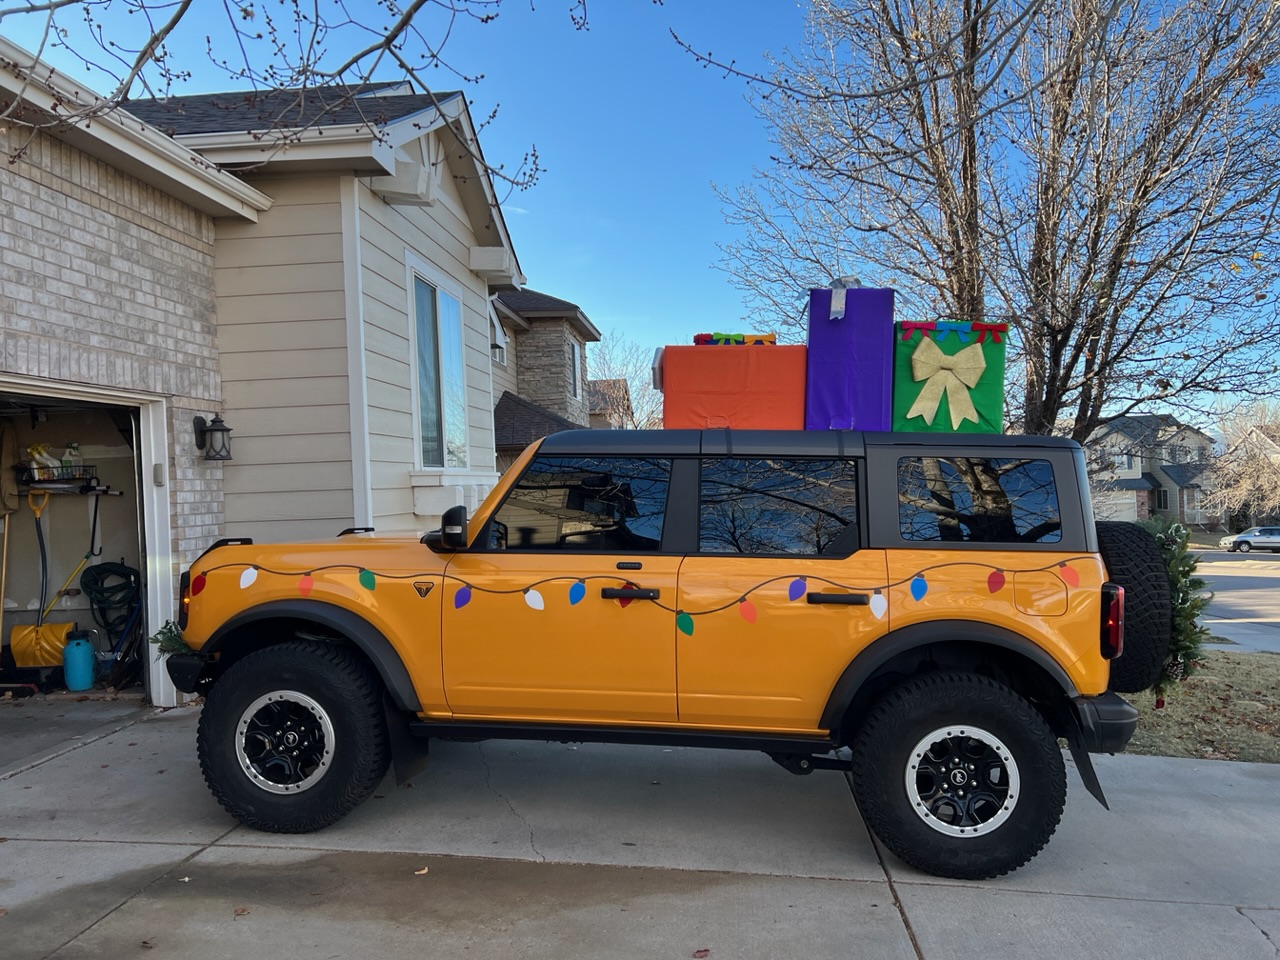 Ford Bronco How are you decorating your Bronco for Christmas or holidays? Post yours! 🎅 tempImageE5mJwT